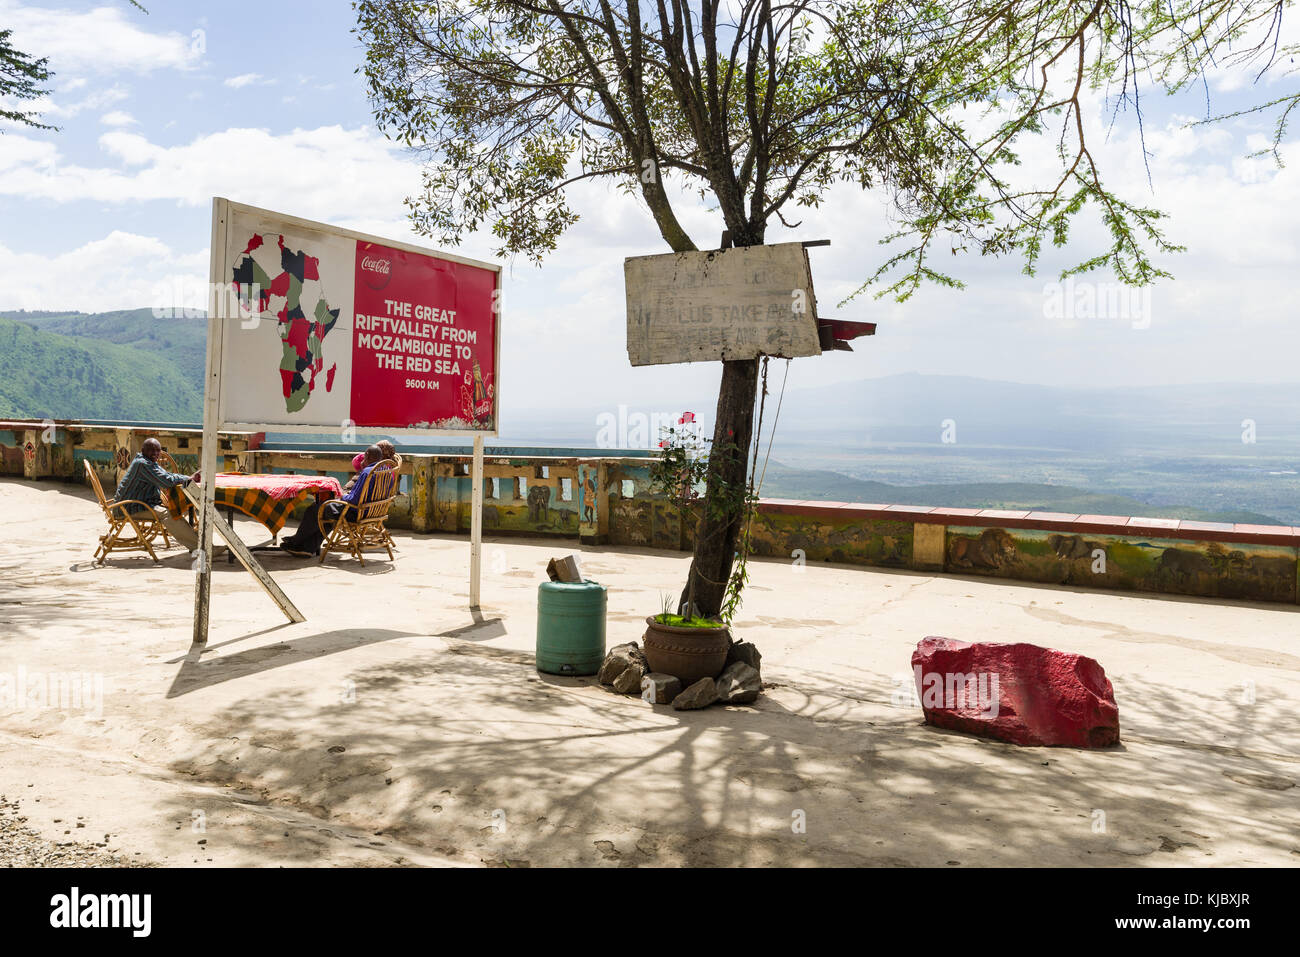 Roadside viewpoint rest stop with people sat at a table looking at the view to the Rift valley, Kenya, East Africa Stock Photo